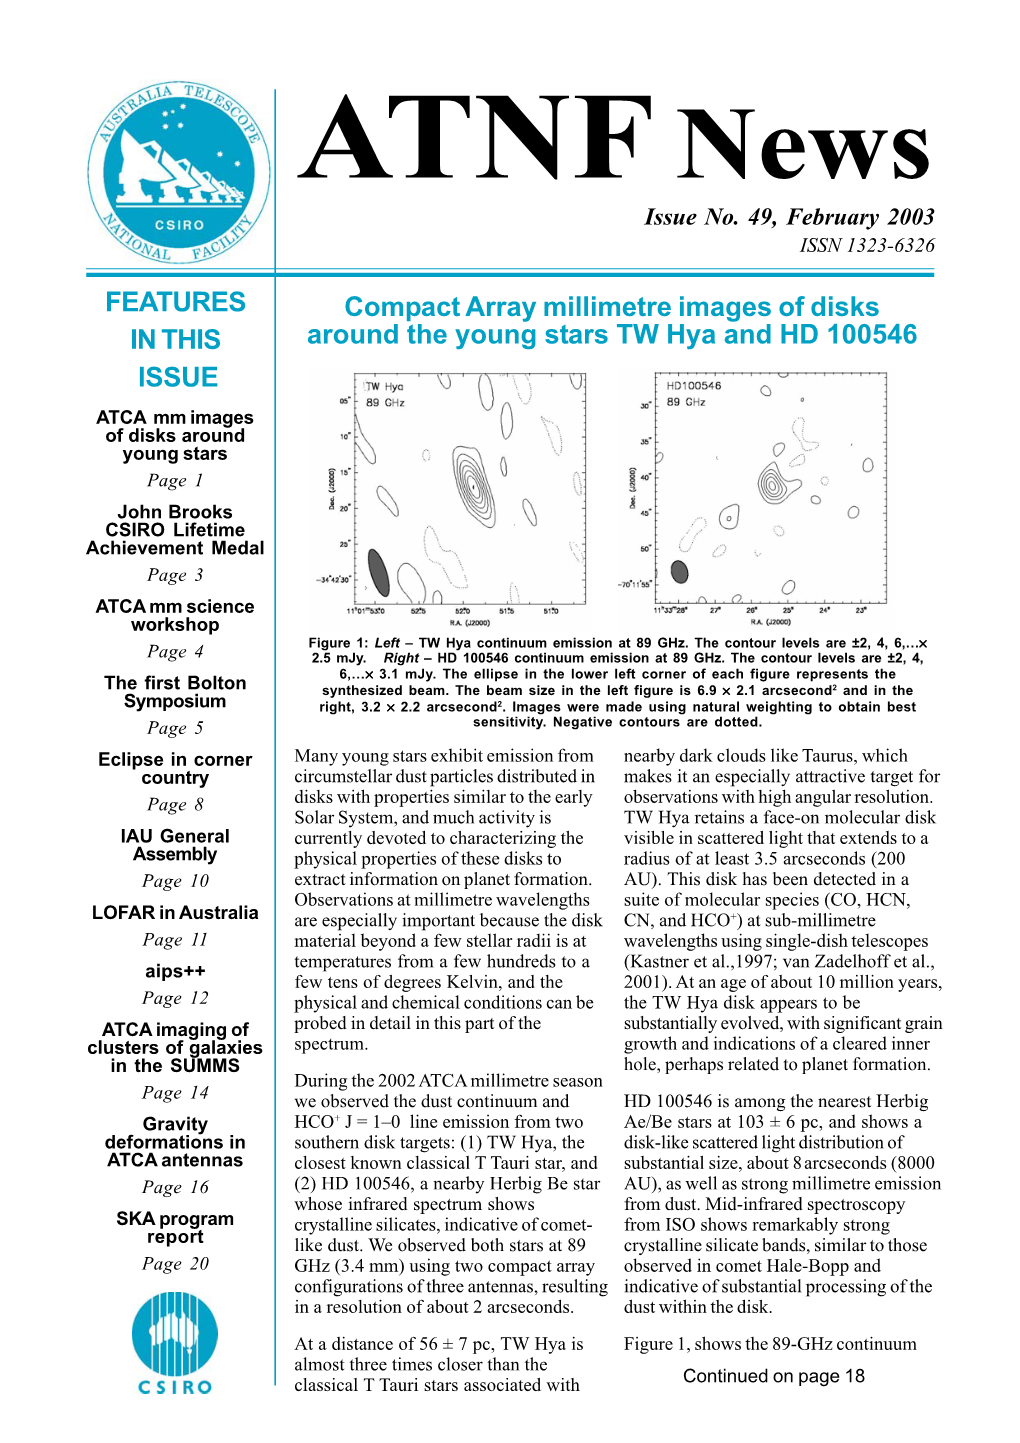 FEATURES in THIS ISSUE Compact Array Millimetre Images of Disks Around the Young Stars TW Hya and HD 100546